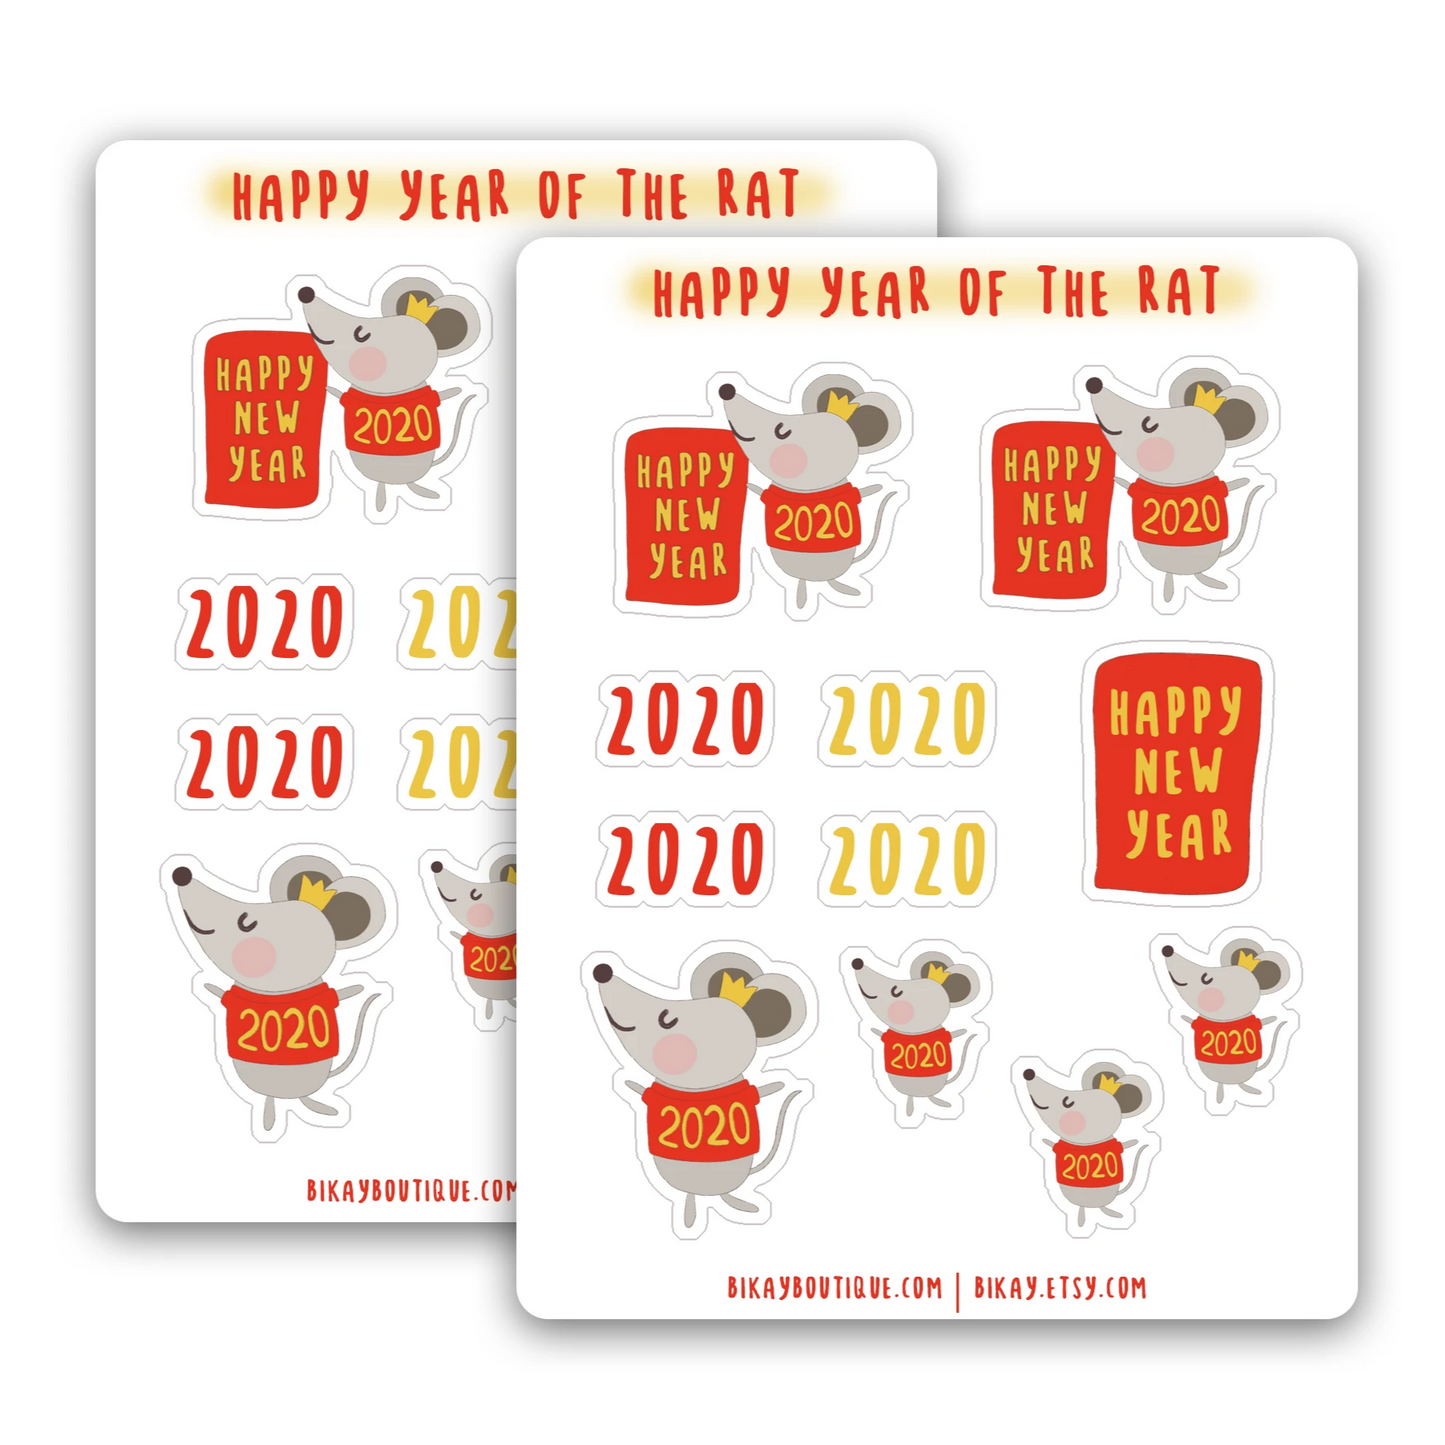 Lunar new year sticker sheet, lunar new year, happy new year stickers, year of the rat